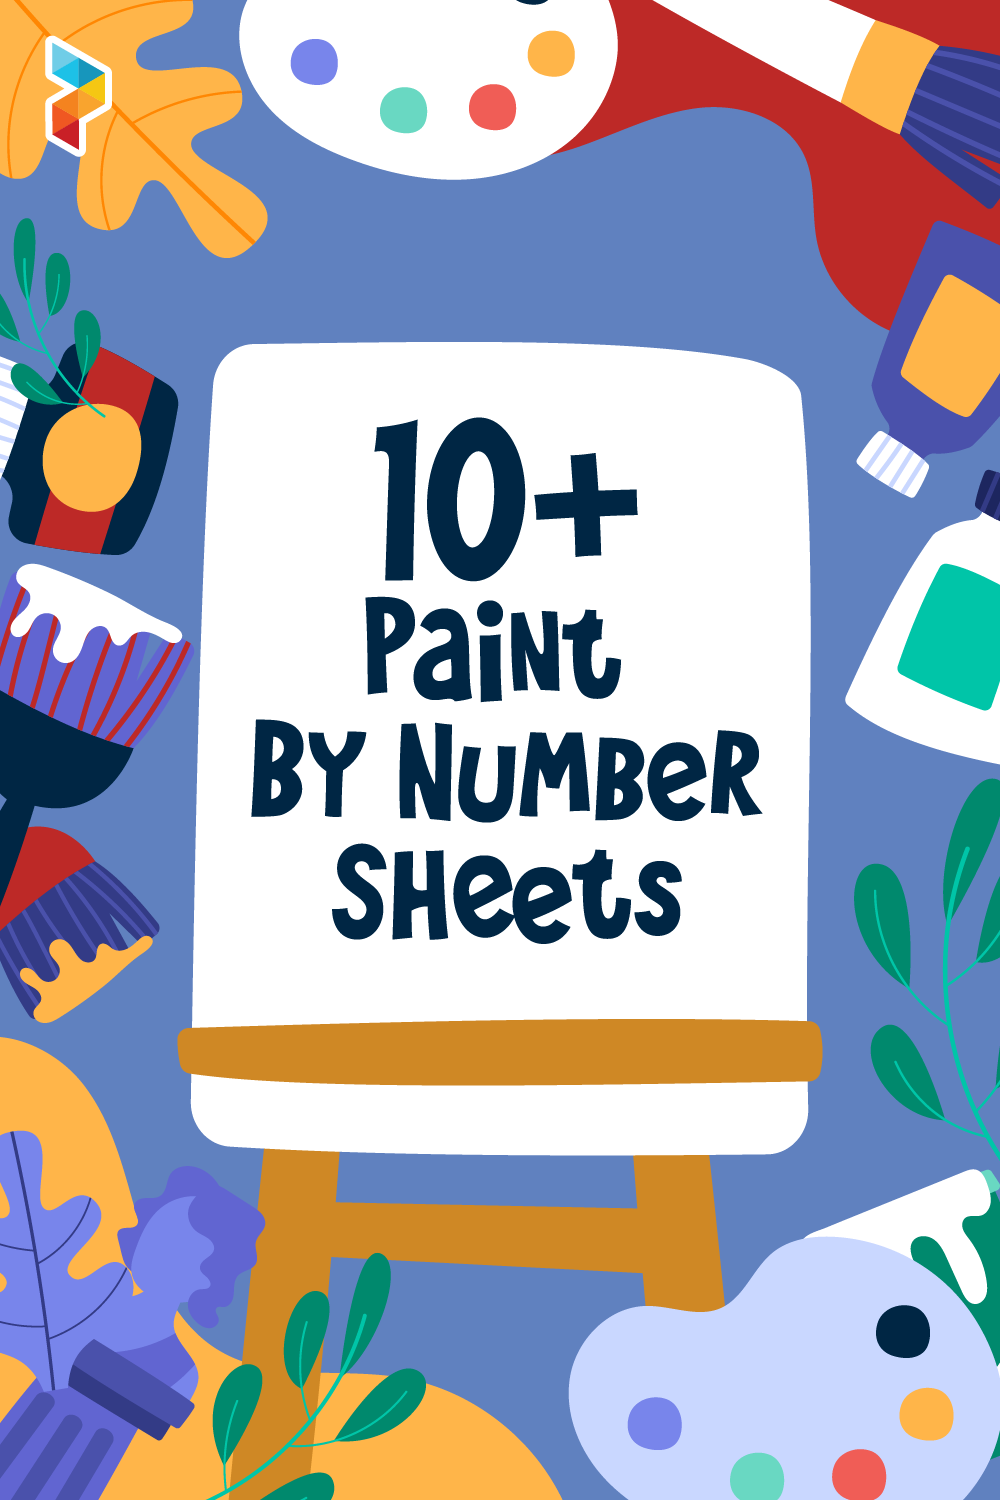 Paint By Number Sheets